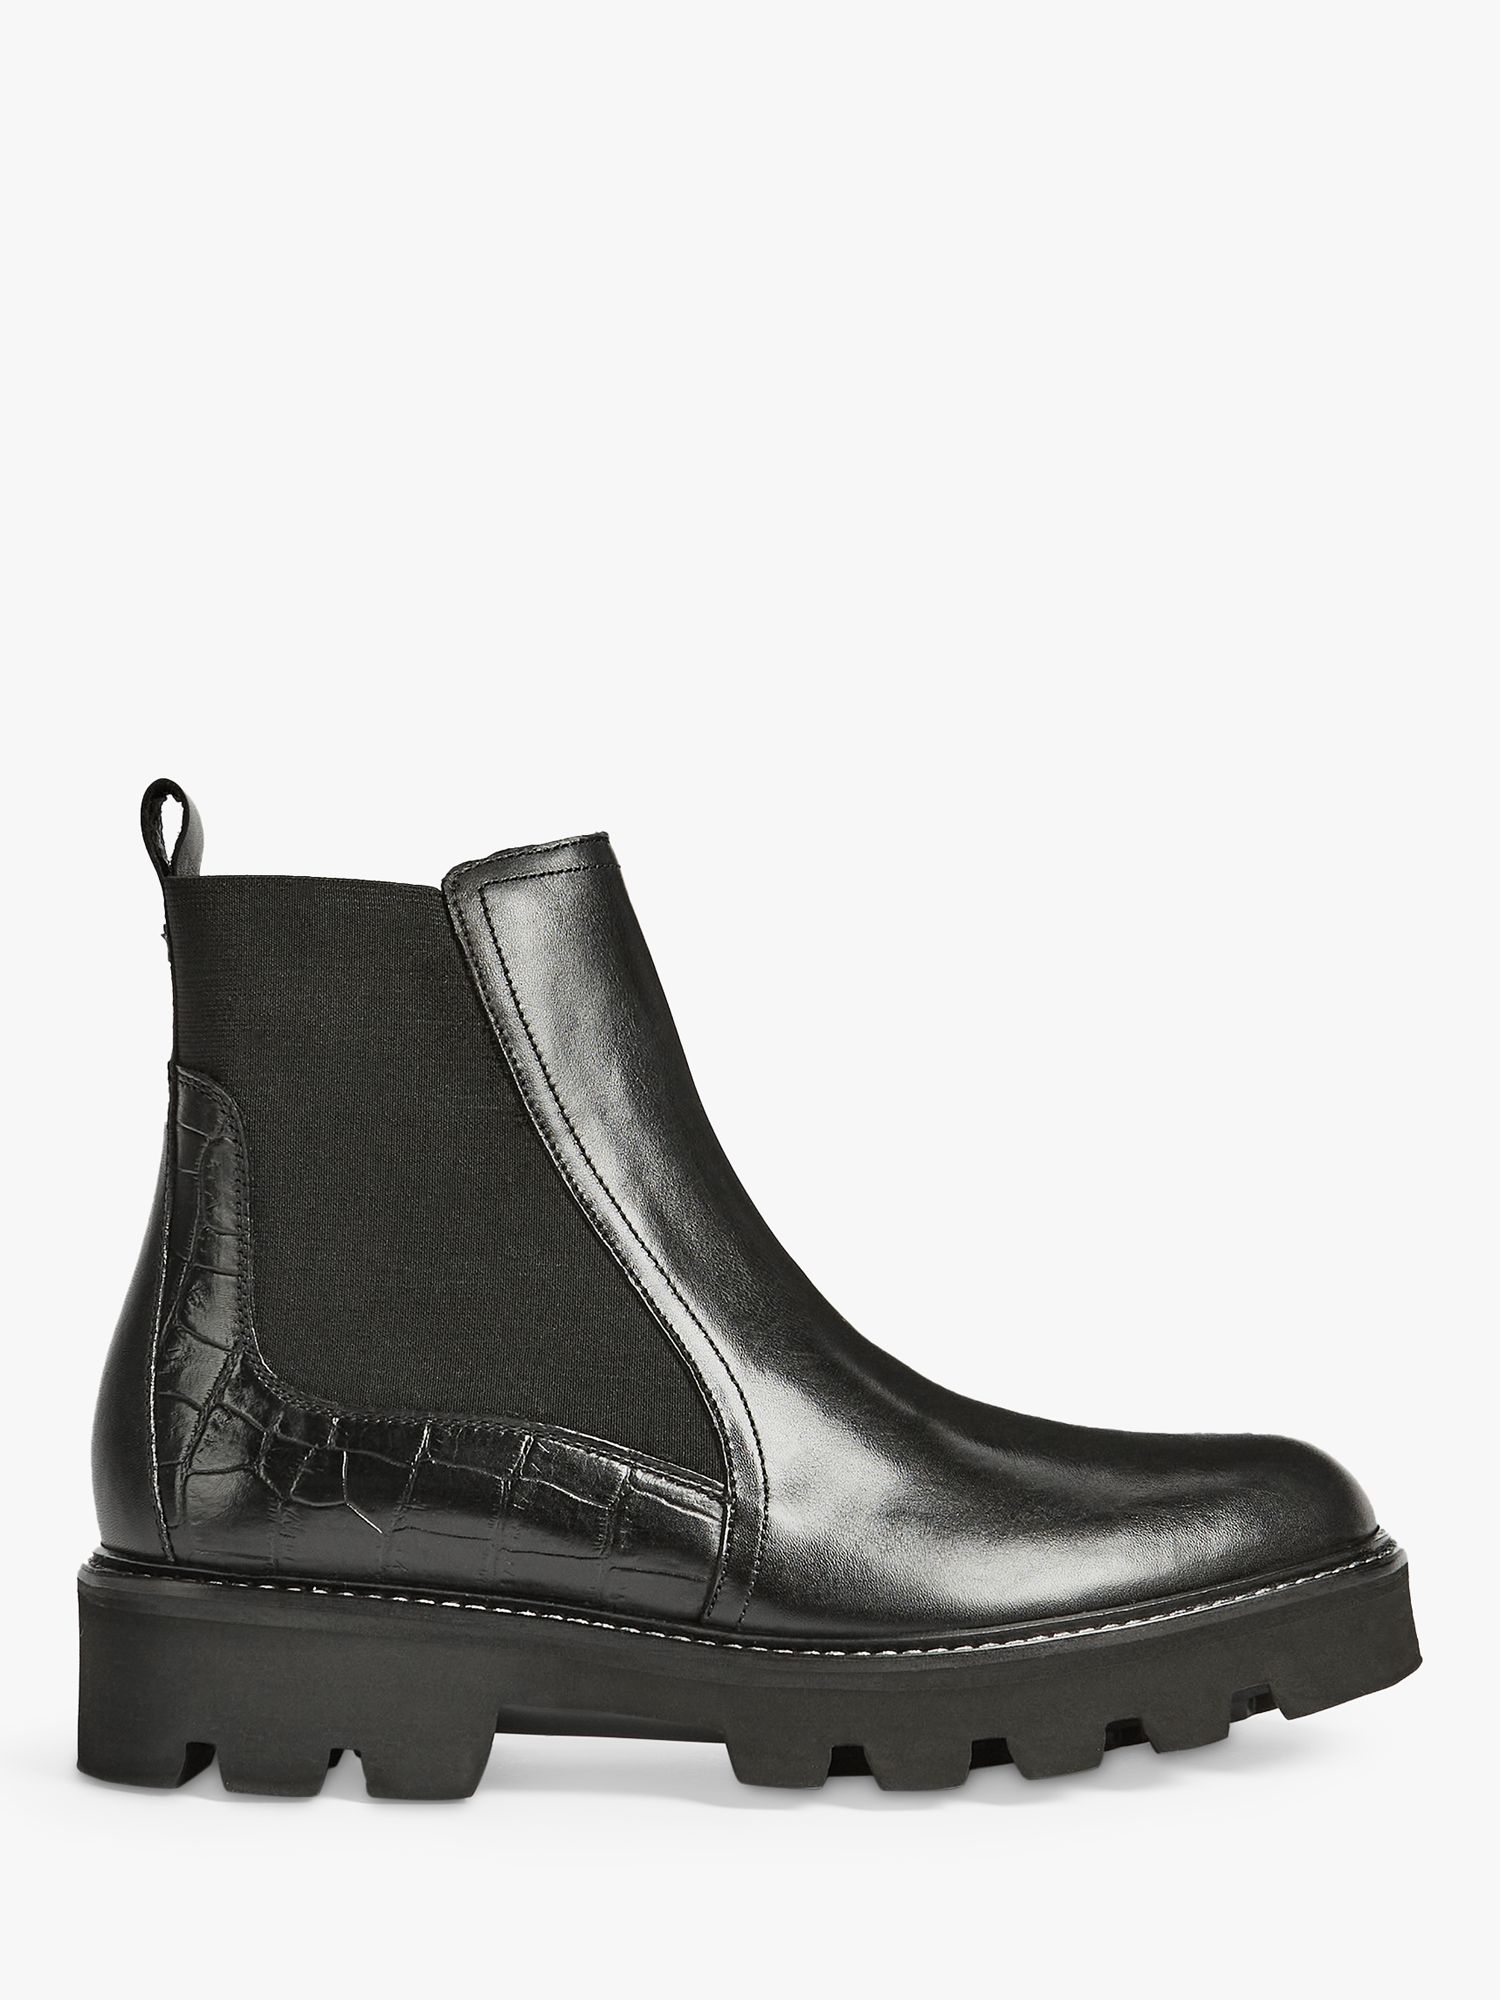 Ted Baker Stompi Leather Ankle Boots, Black at John Lewis & Partners